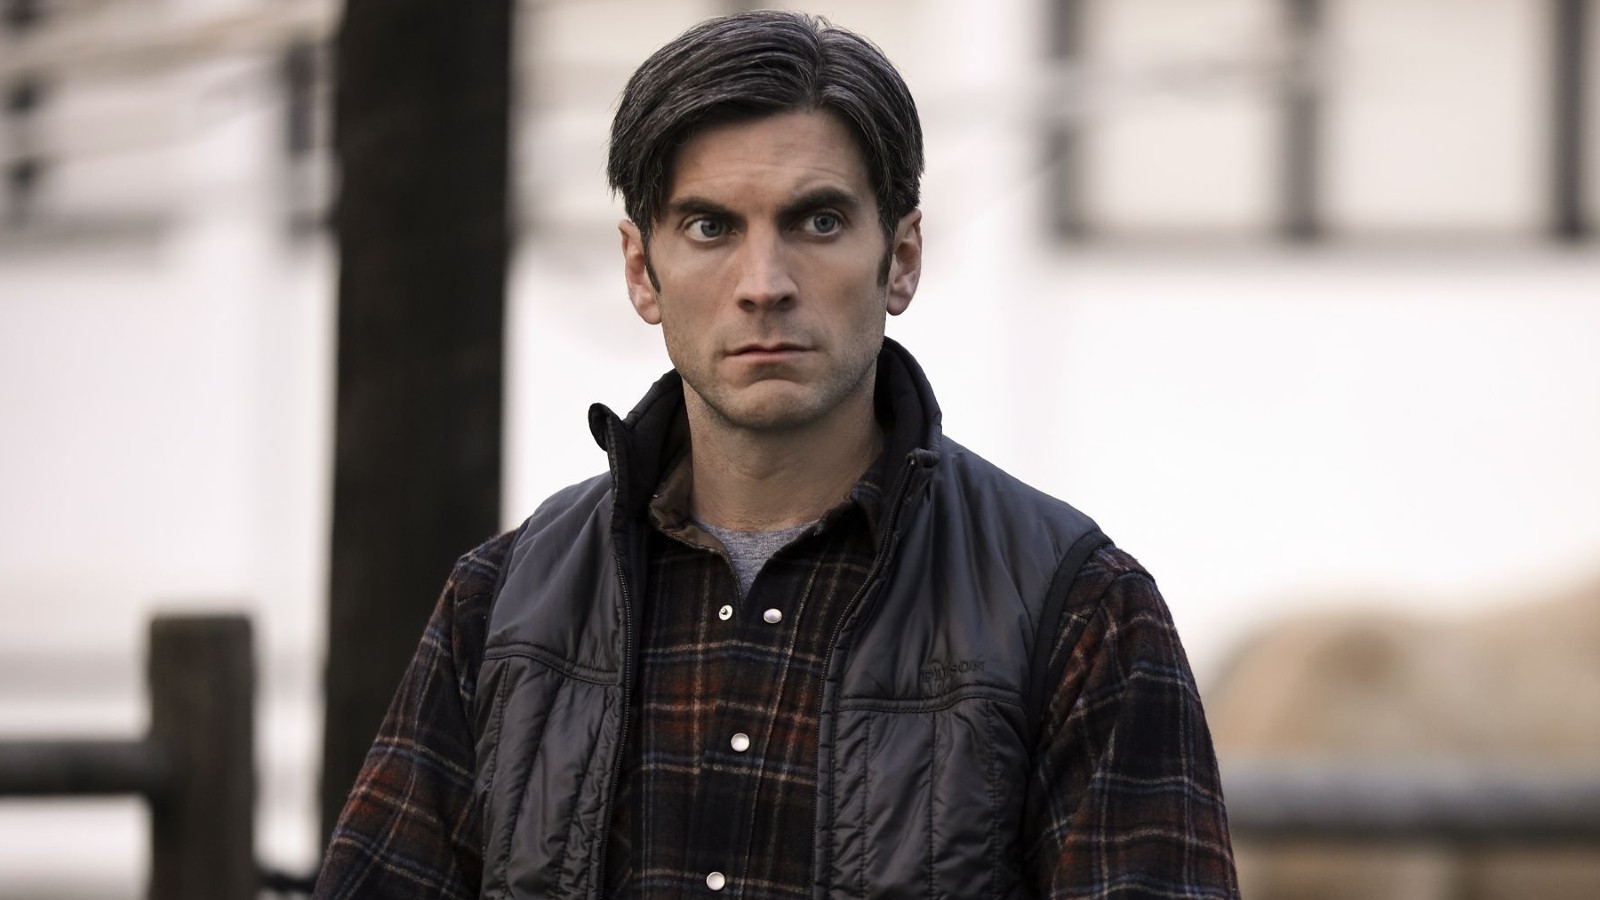 ‘Yellowstone’ star Wes Bentley credits Robert Downey Jr. for helping him overcome addiction